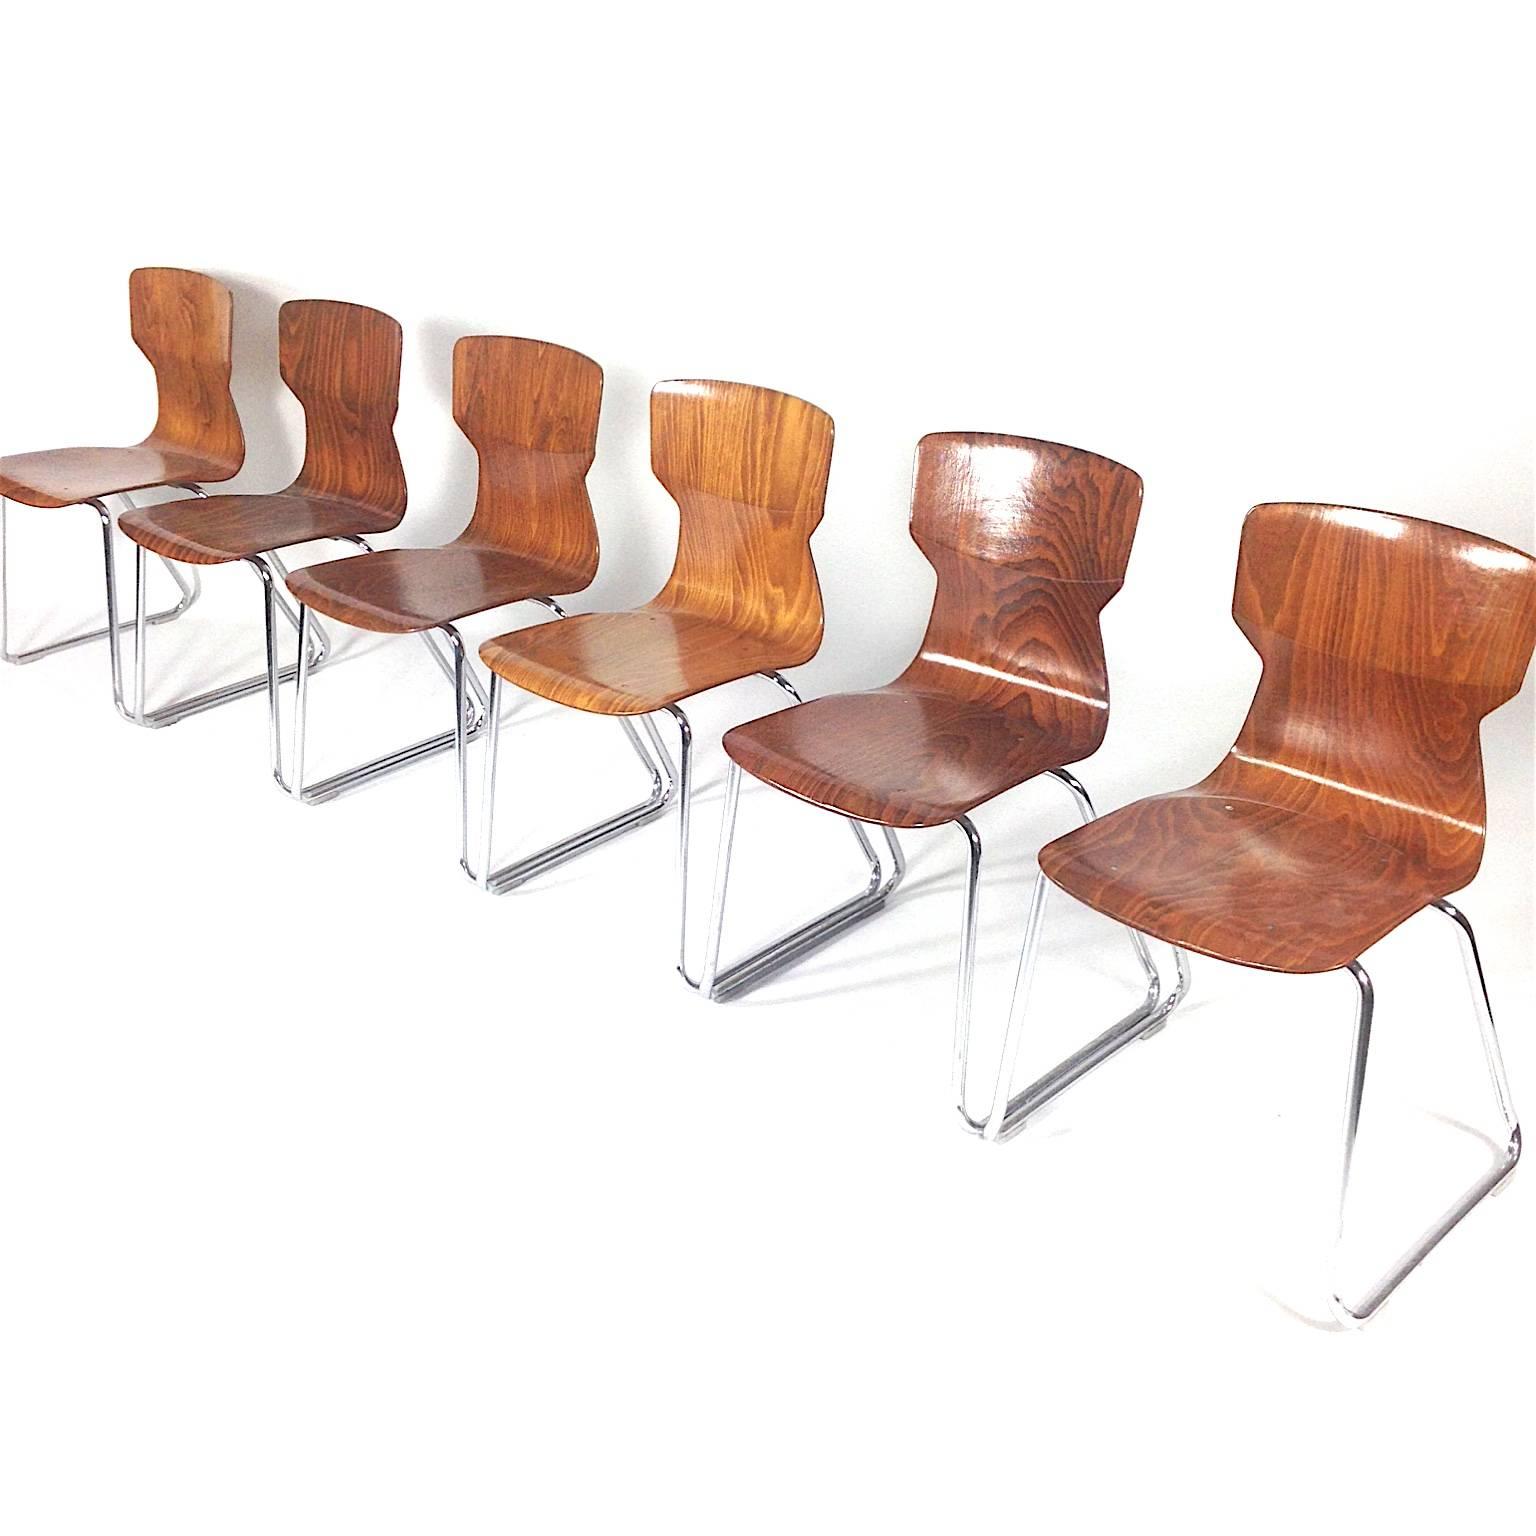 Dutch Set of Casala Flototto Industrial Stacking School Chairs 